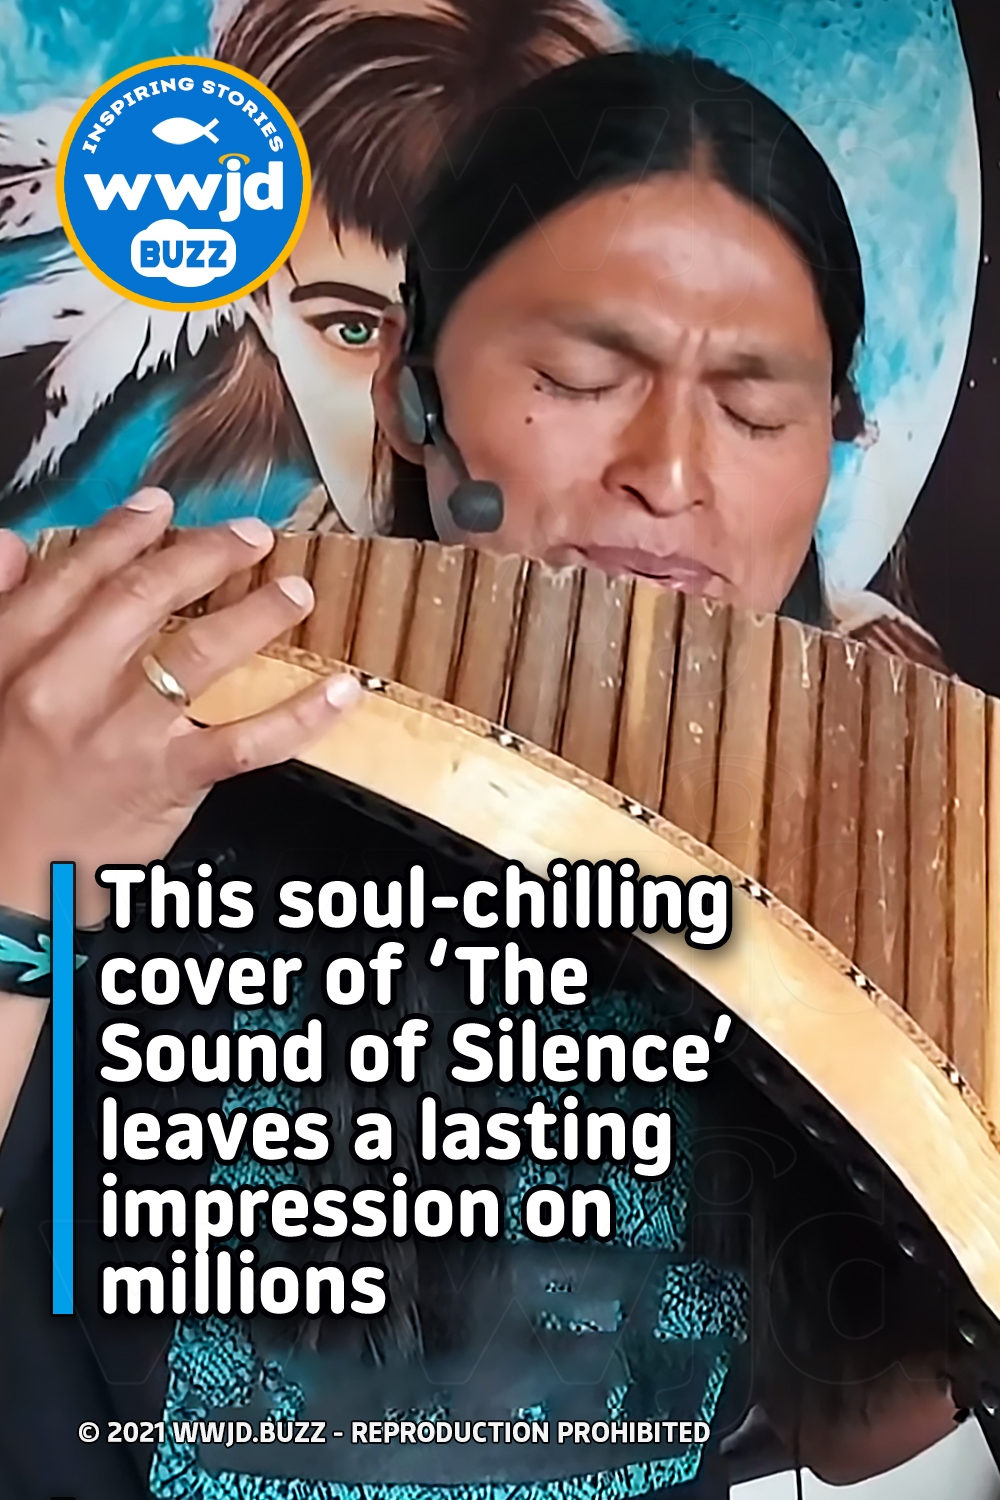 This soul-chilling cover of ‘The Sound of Silence’ leaves a lasting impression on millions